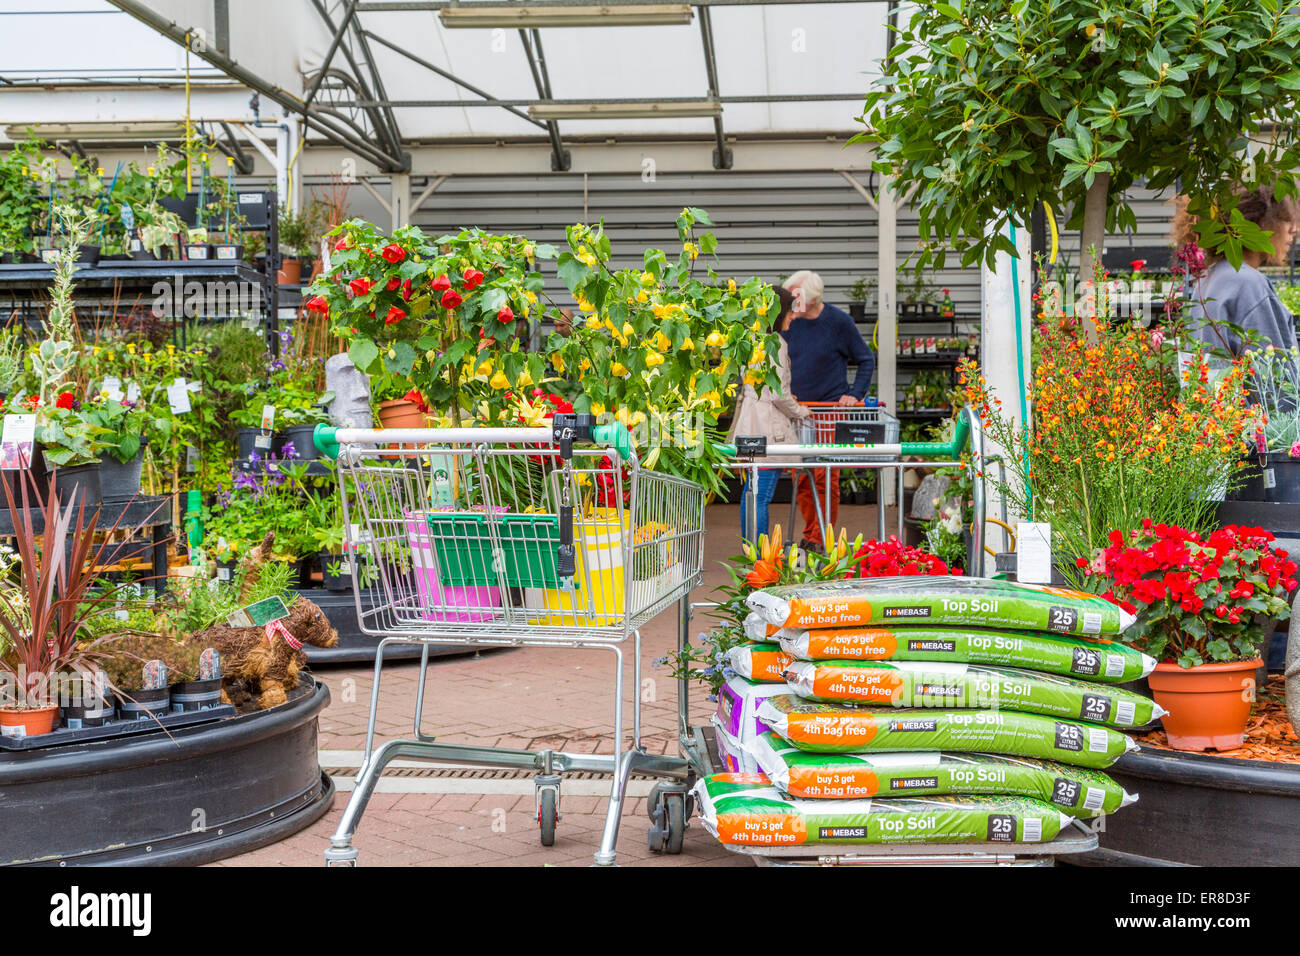 Homebase Garden Centre showing a trolley full of plants ready to buy at the busy tills, London England UK Stock Photo